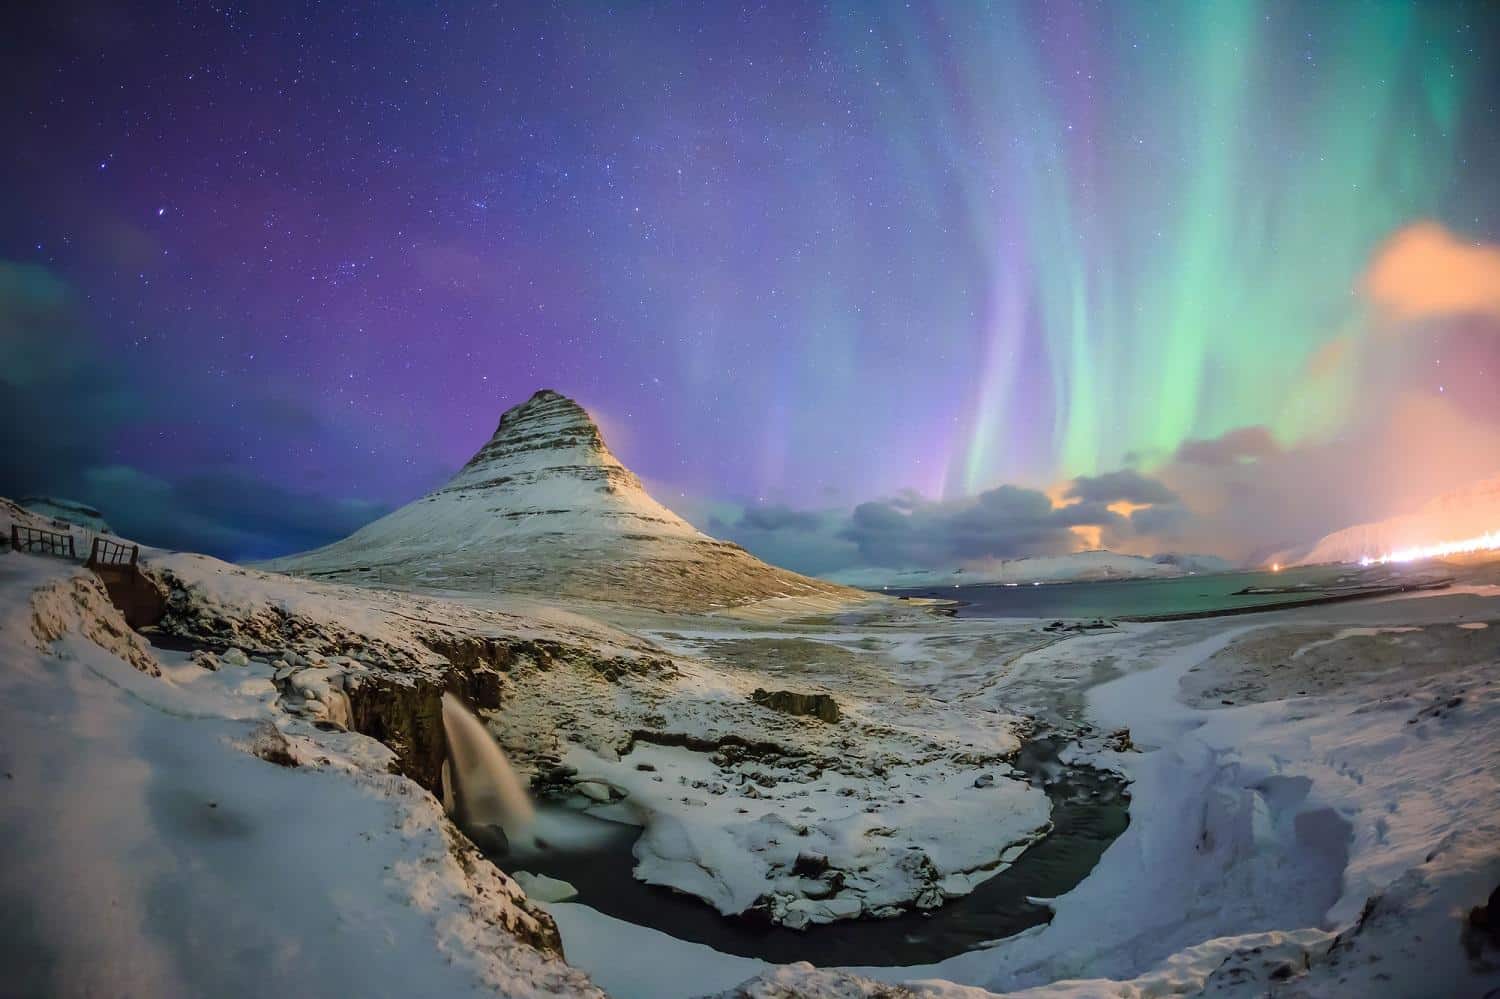 The Northern Lights over Mount Kirkjufell in Iceland